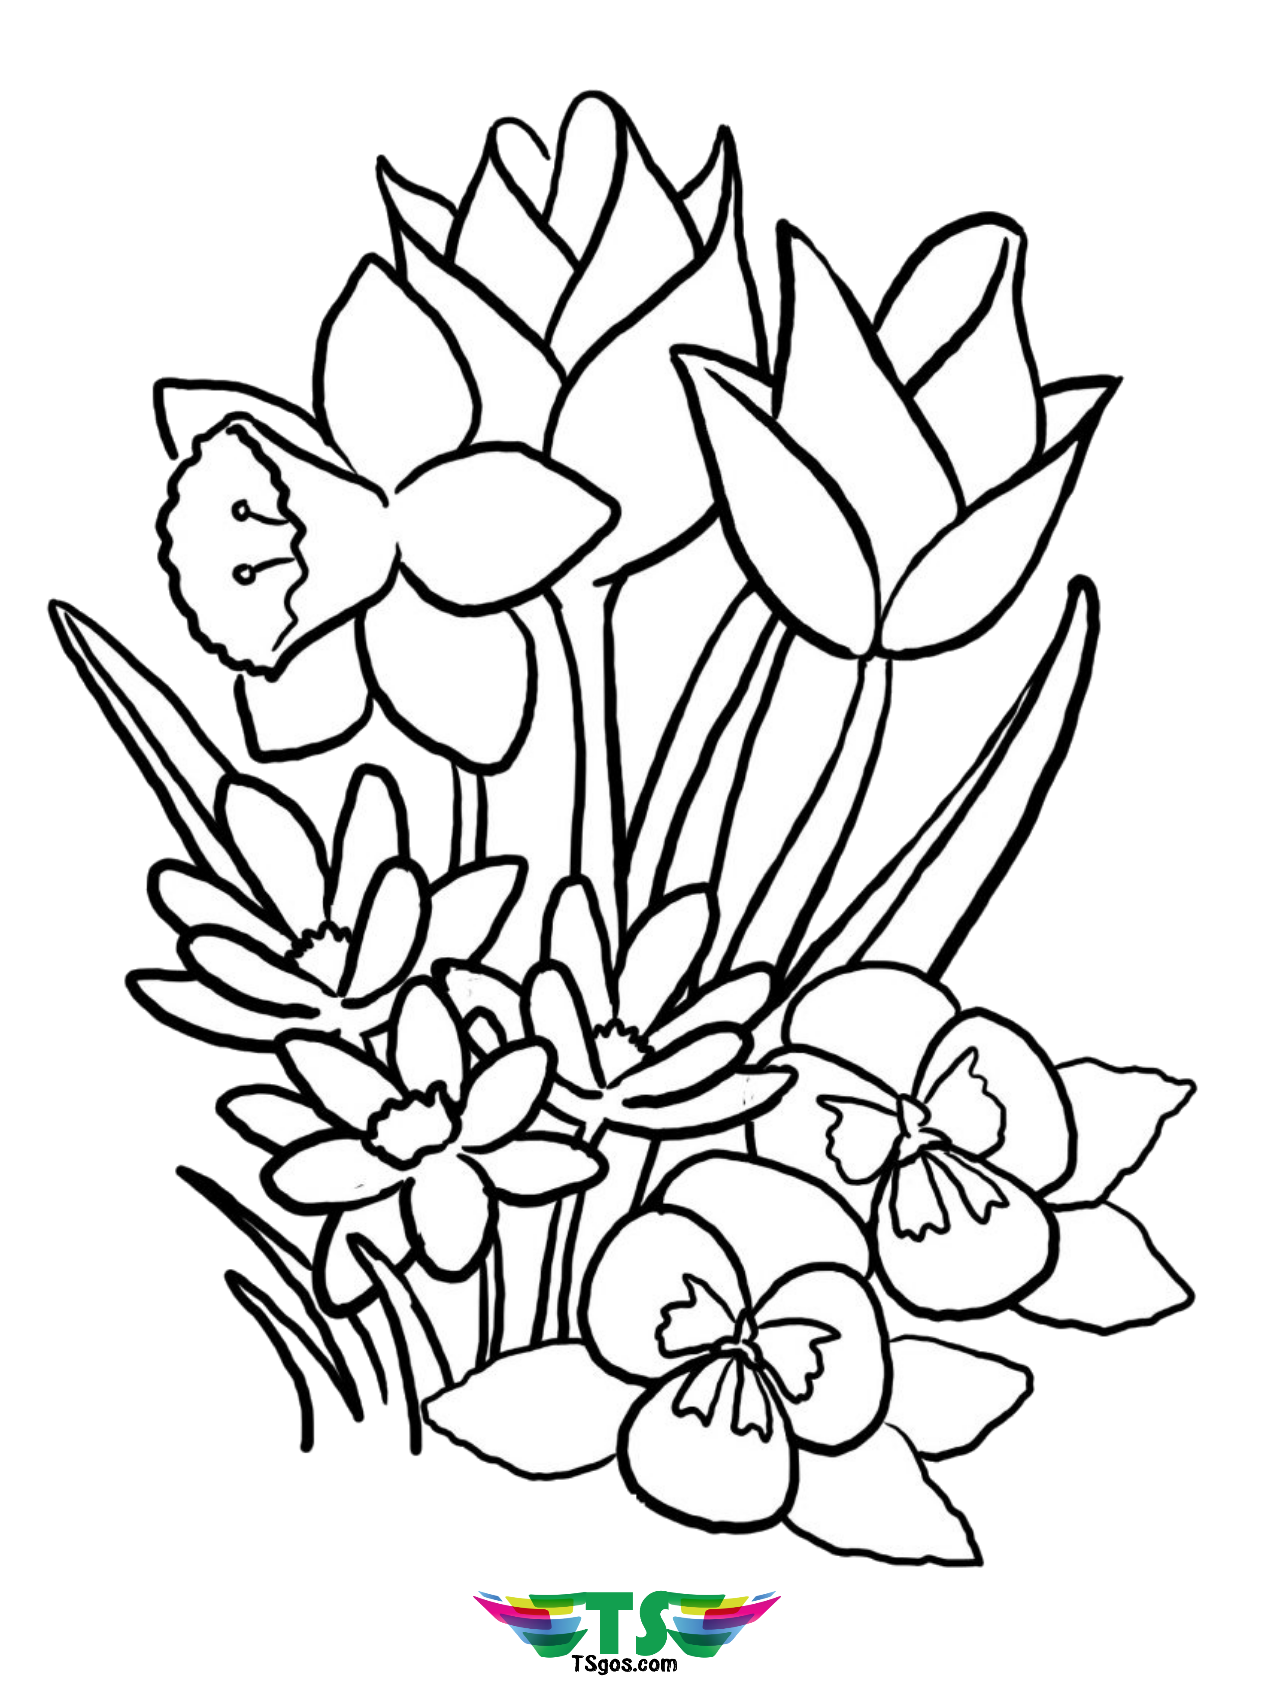 Free download to print beautiful spring flower coloring ...